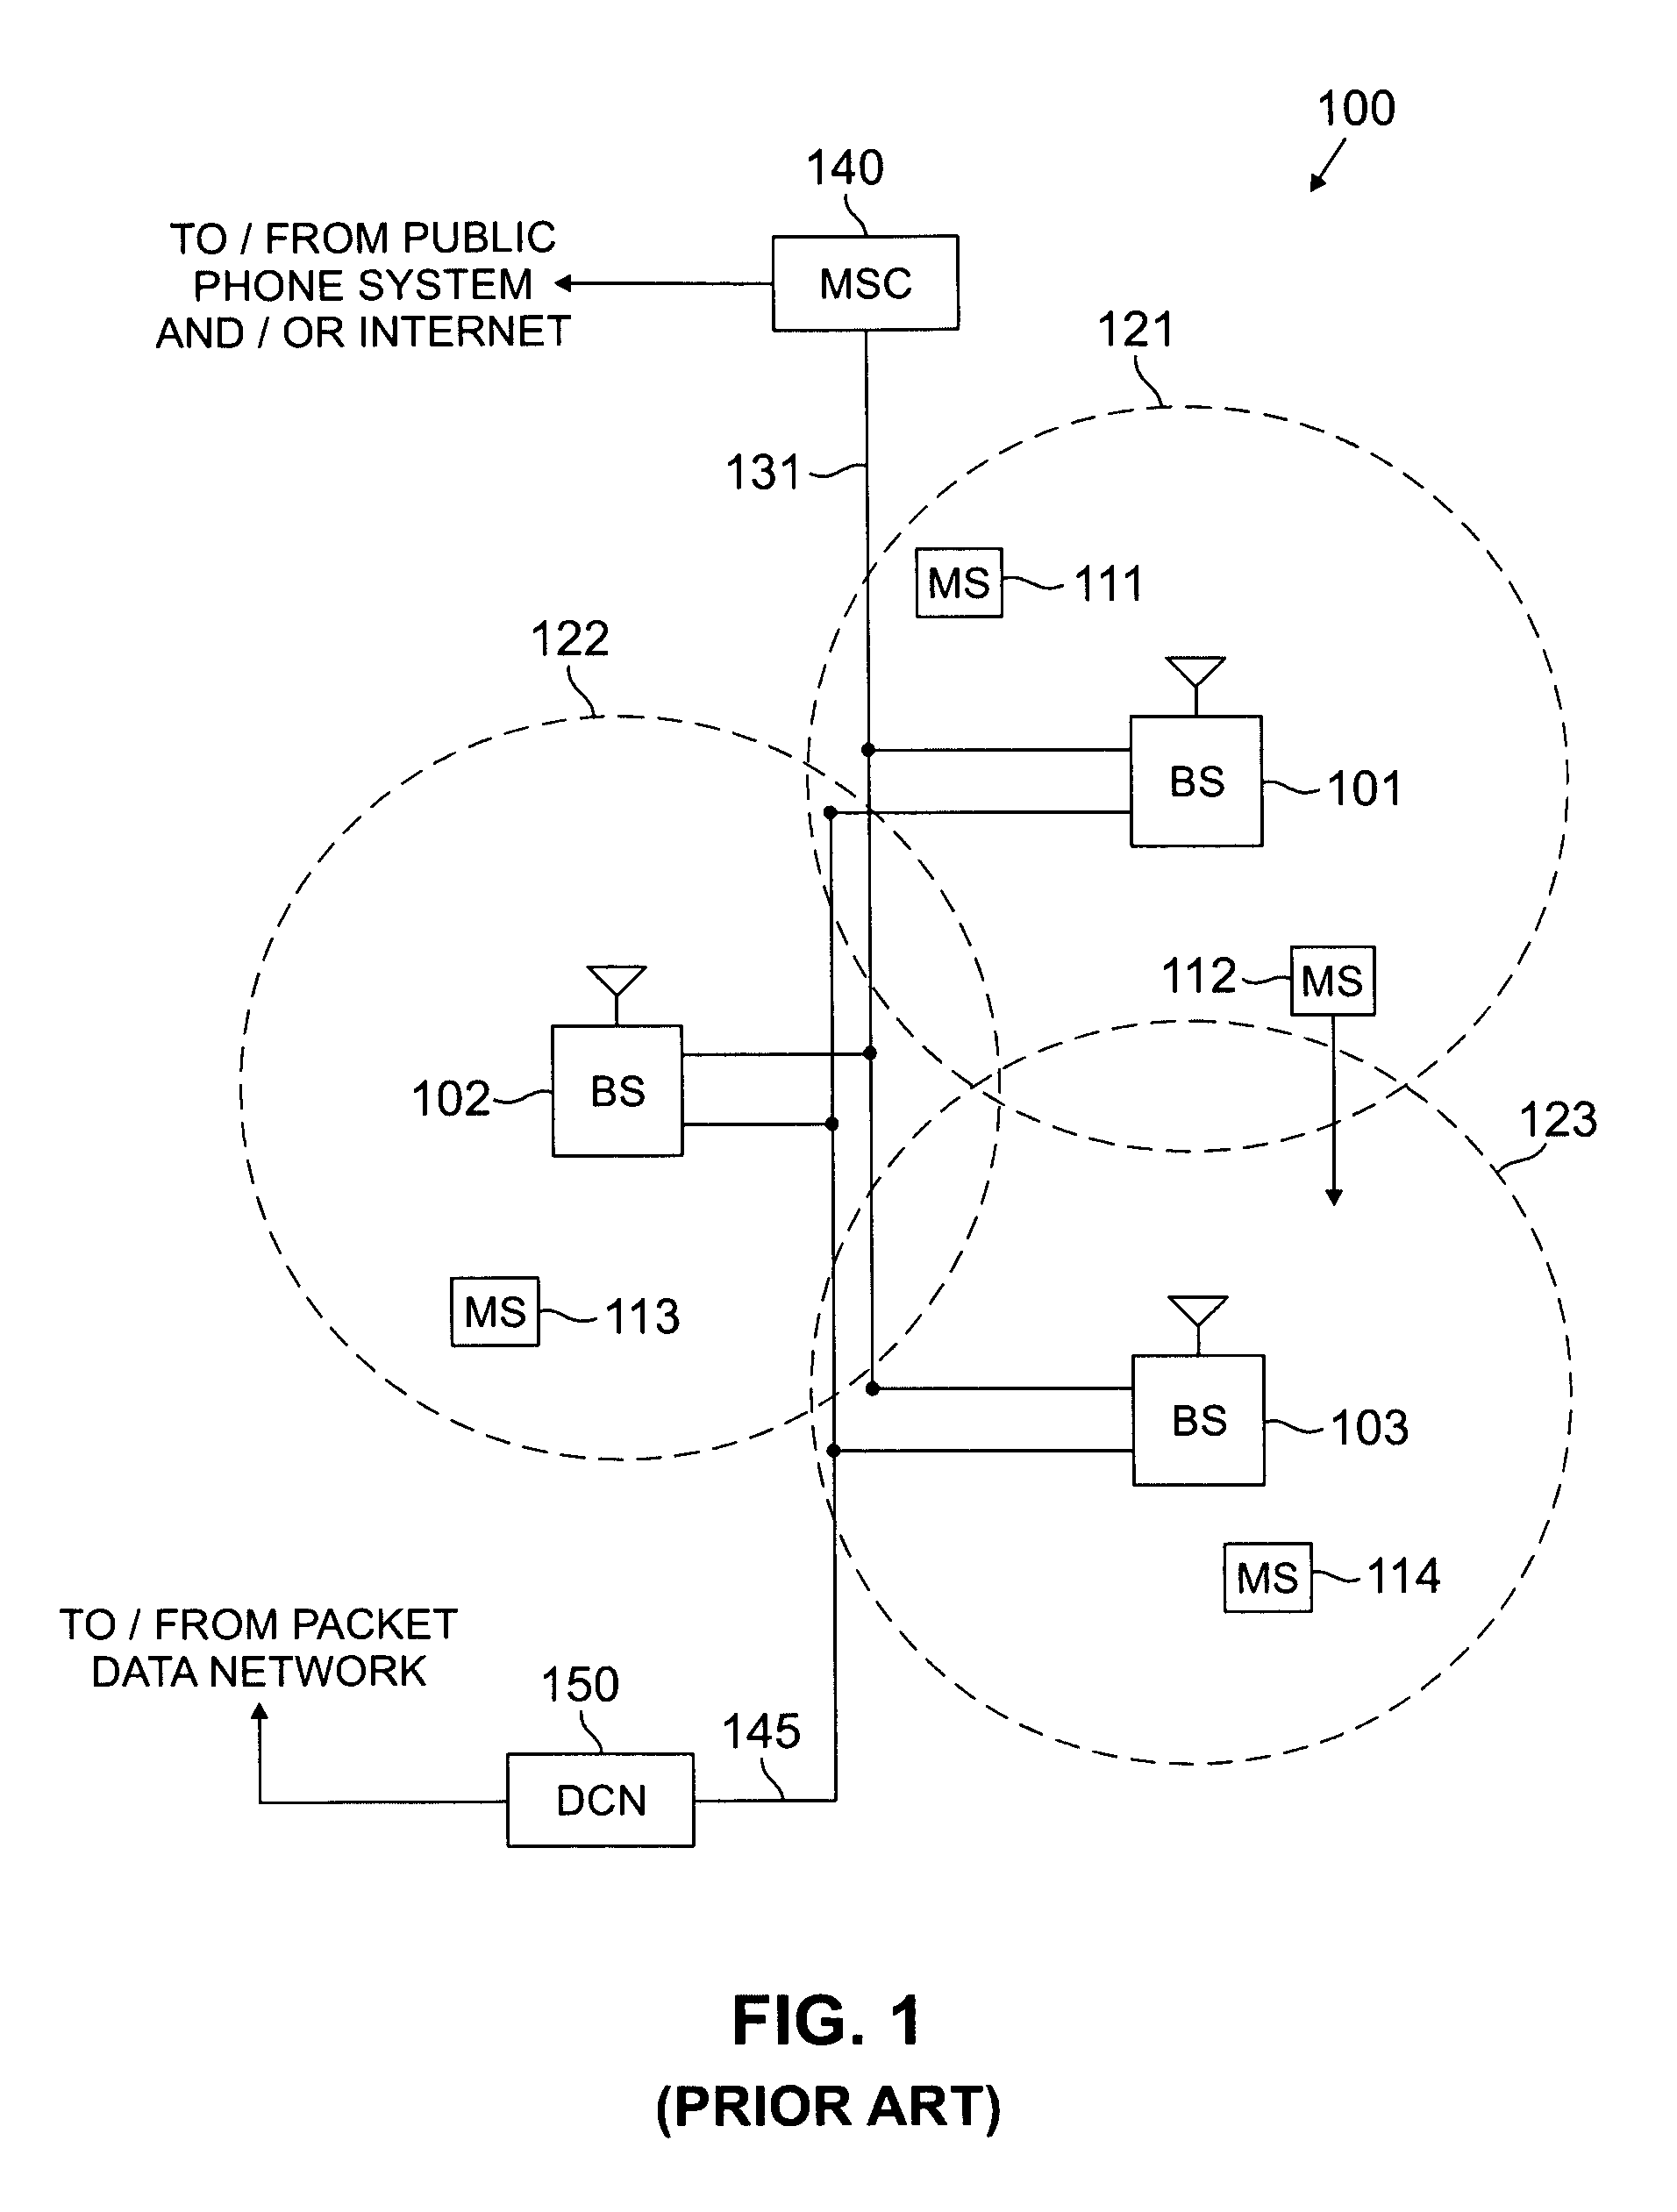 System and method for providing rescue channel communications between base stations in a wireless communication system